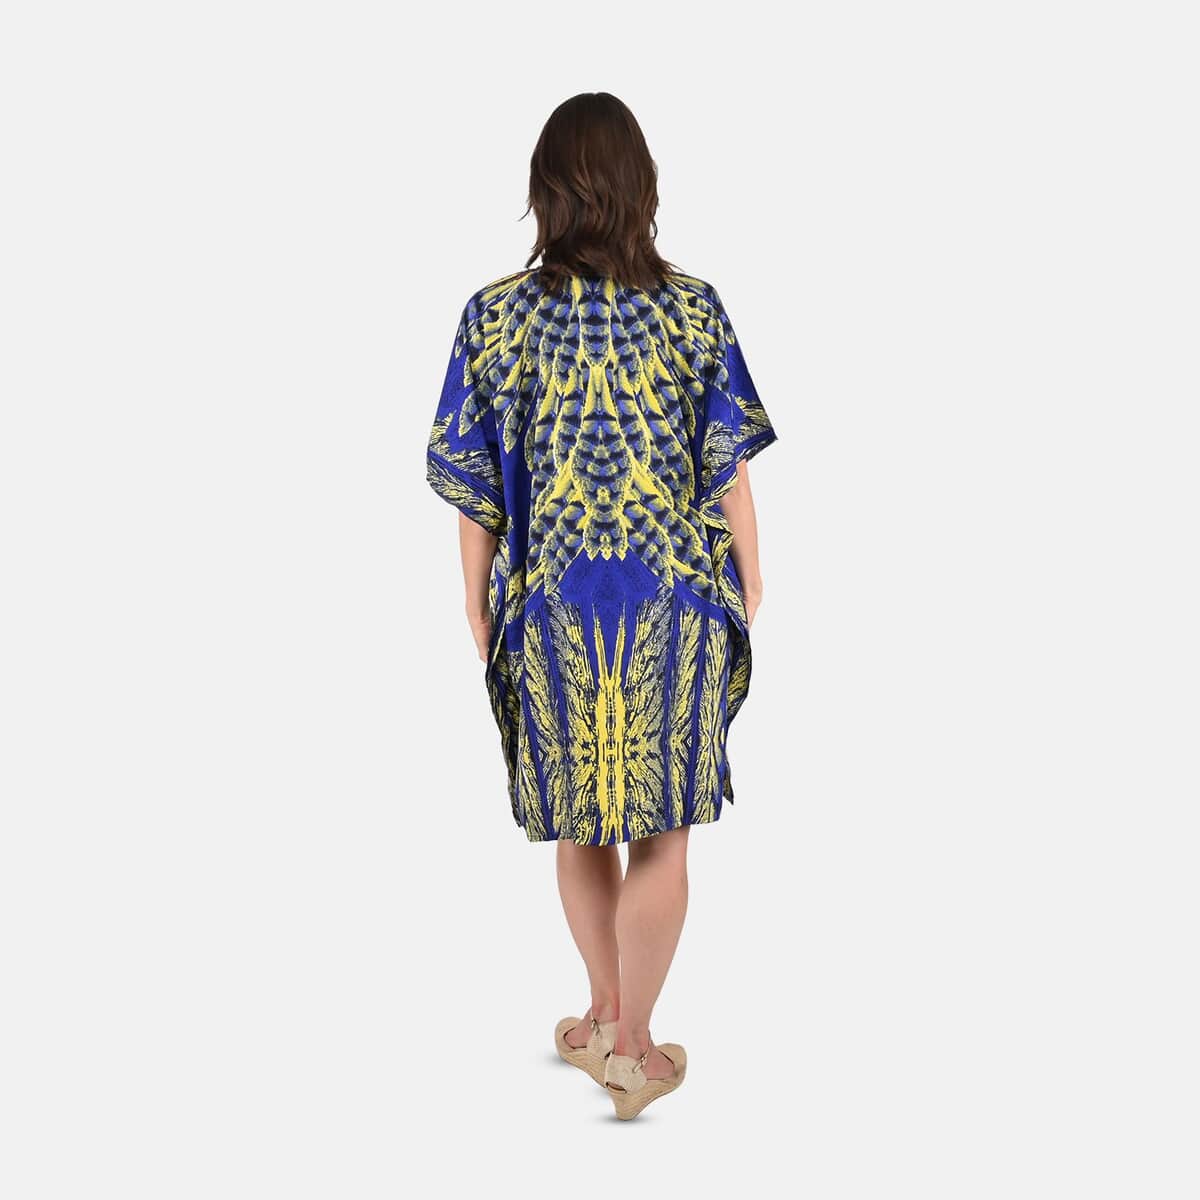 TAMSY Blue Feather Screen Printed Short Kaftan - One Size Fits Most (36"x41") image number 1